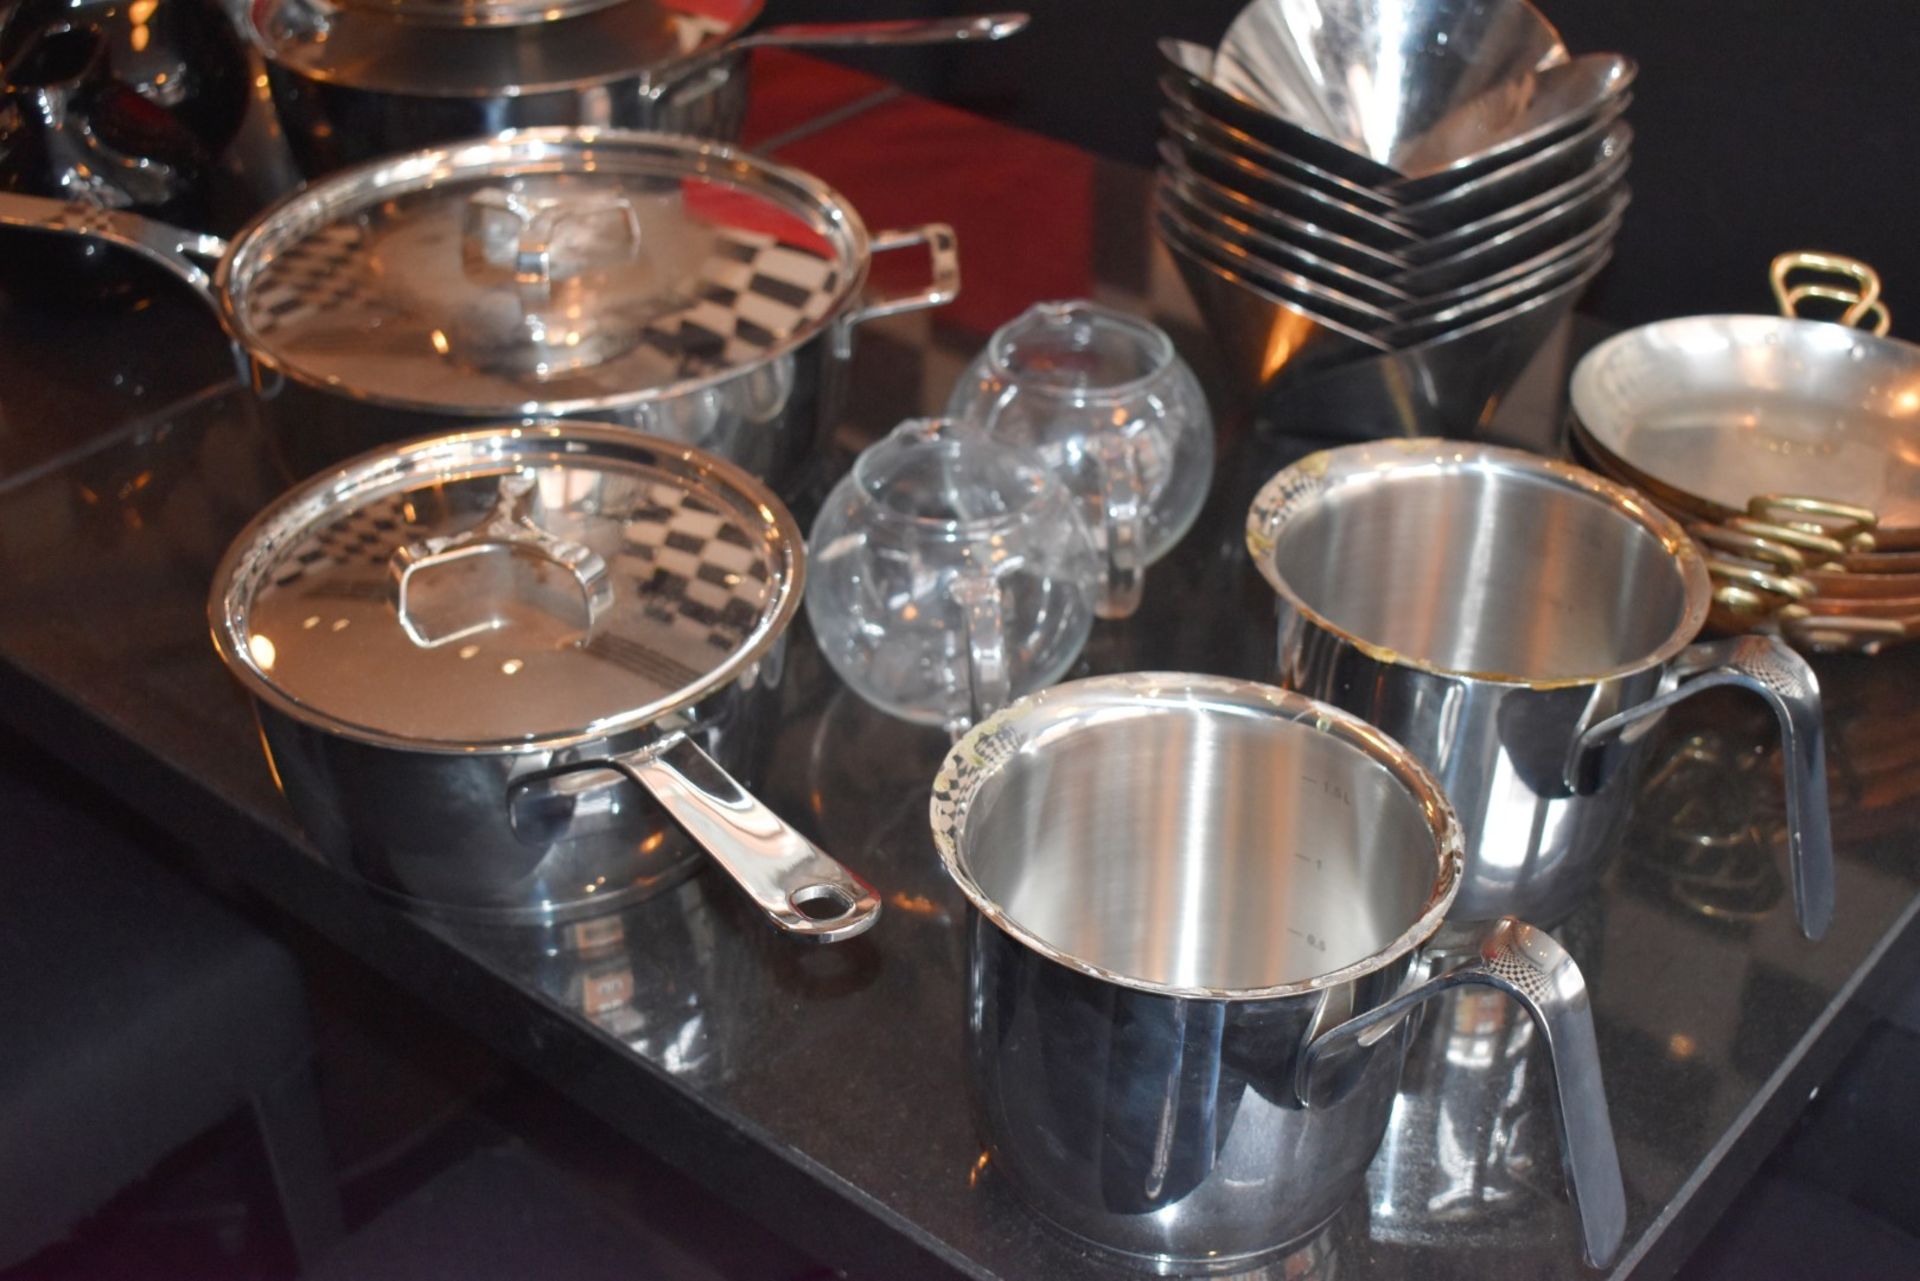 Approx 41 x Items of Kitchen and Tableware - Includes Stainless Steel Rolling Pins, Wall Clock, - Image 13 of 17